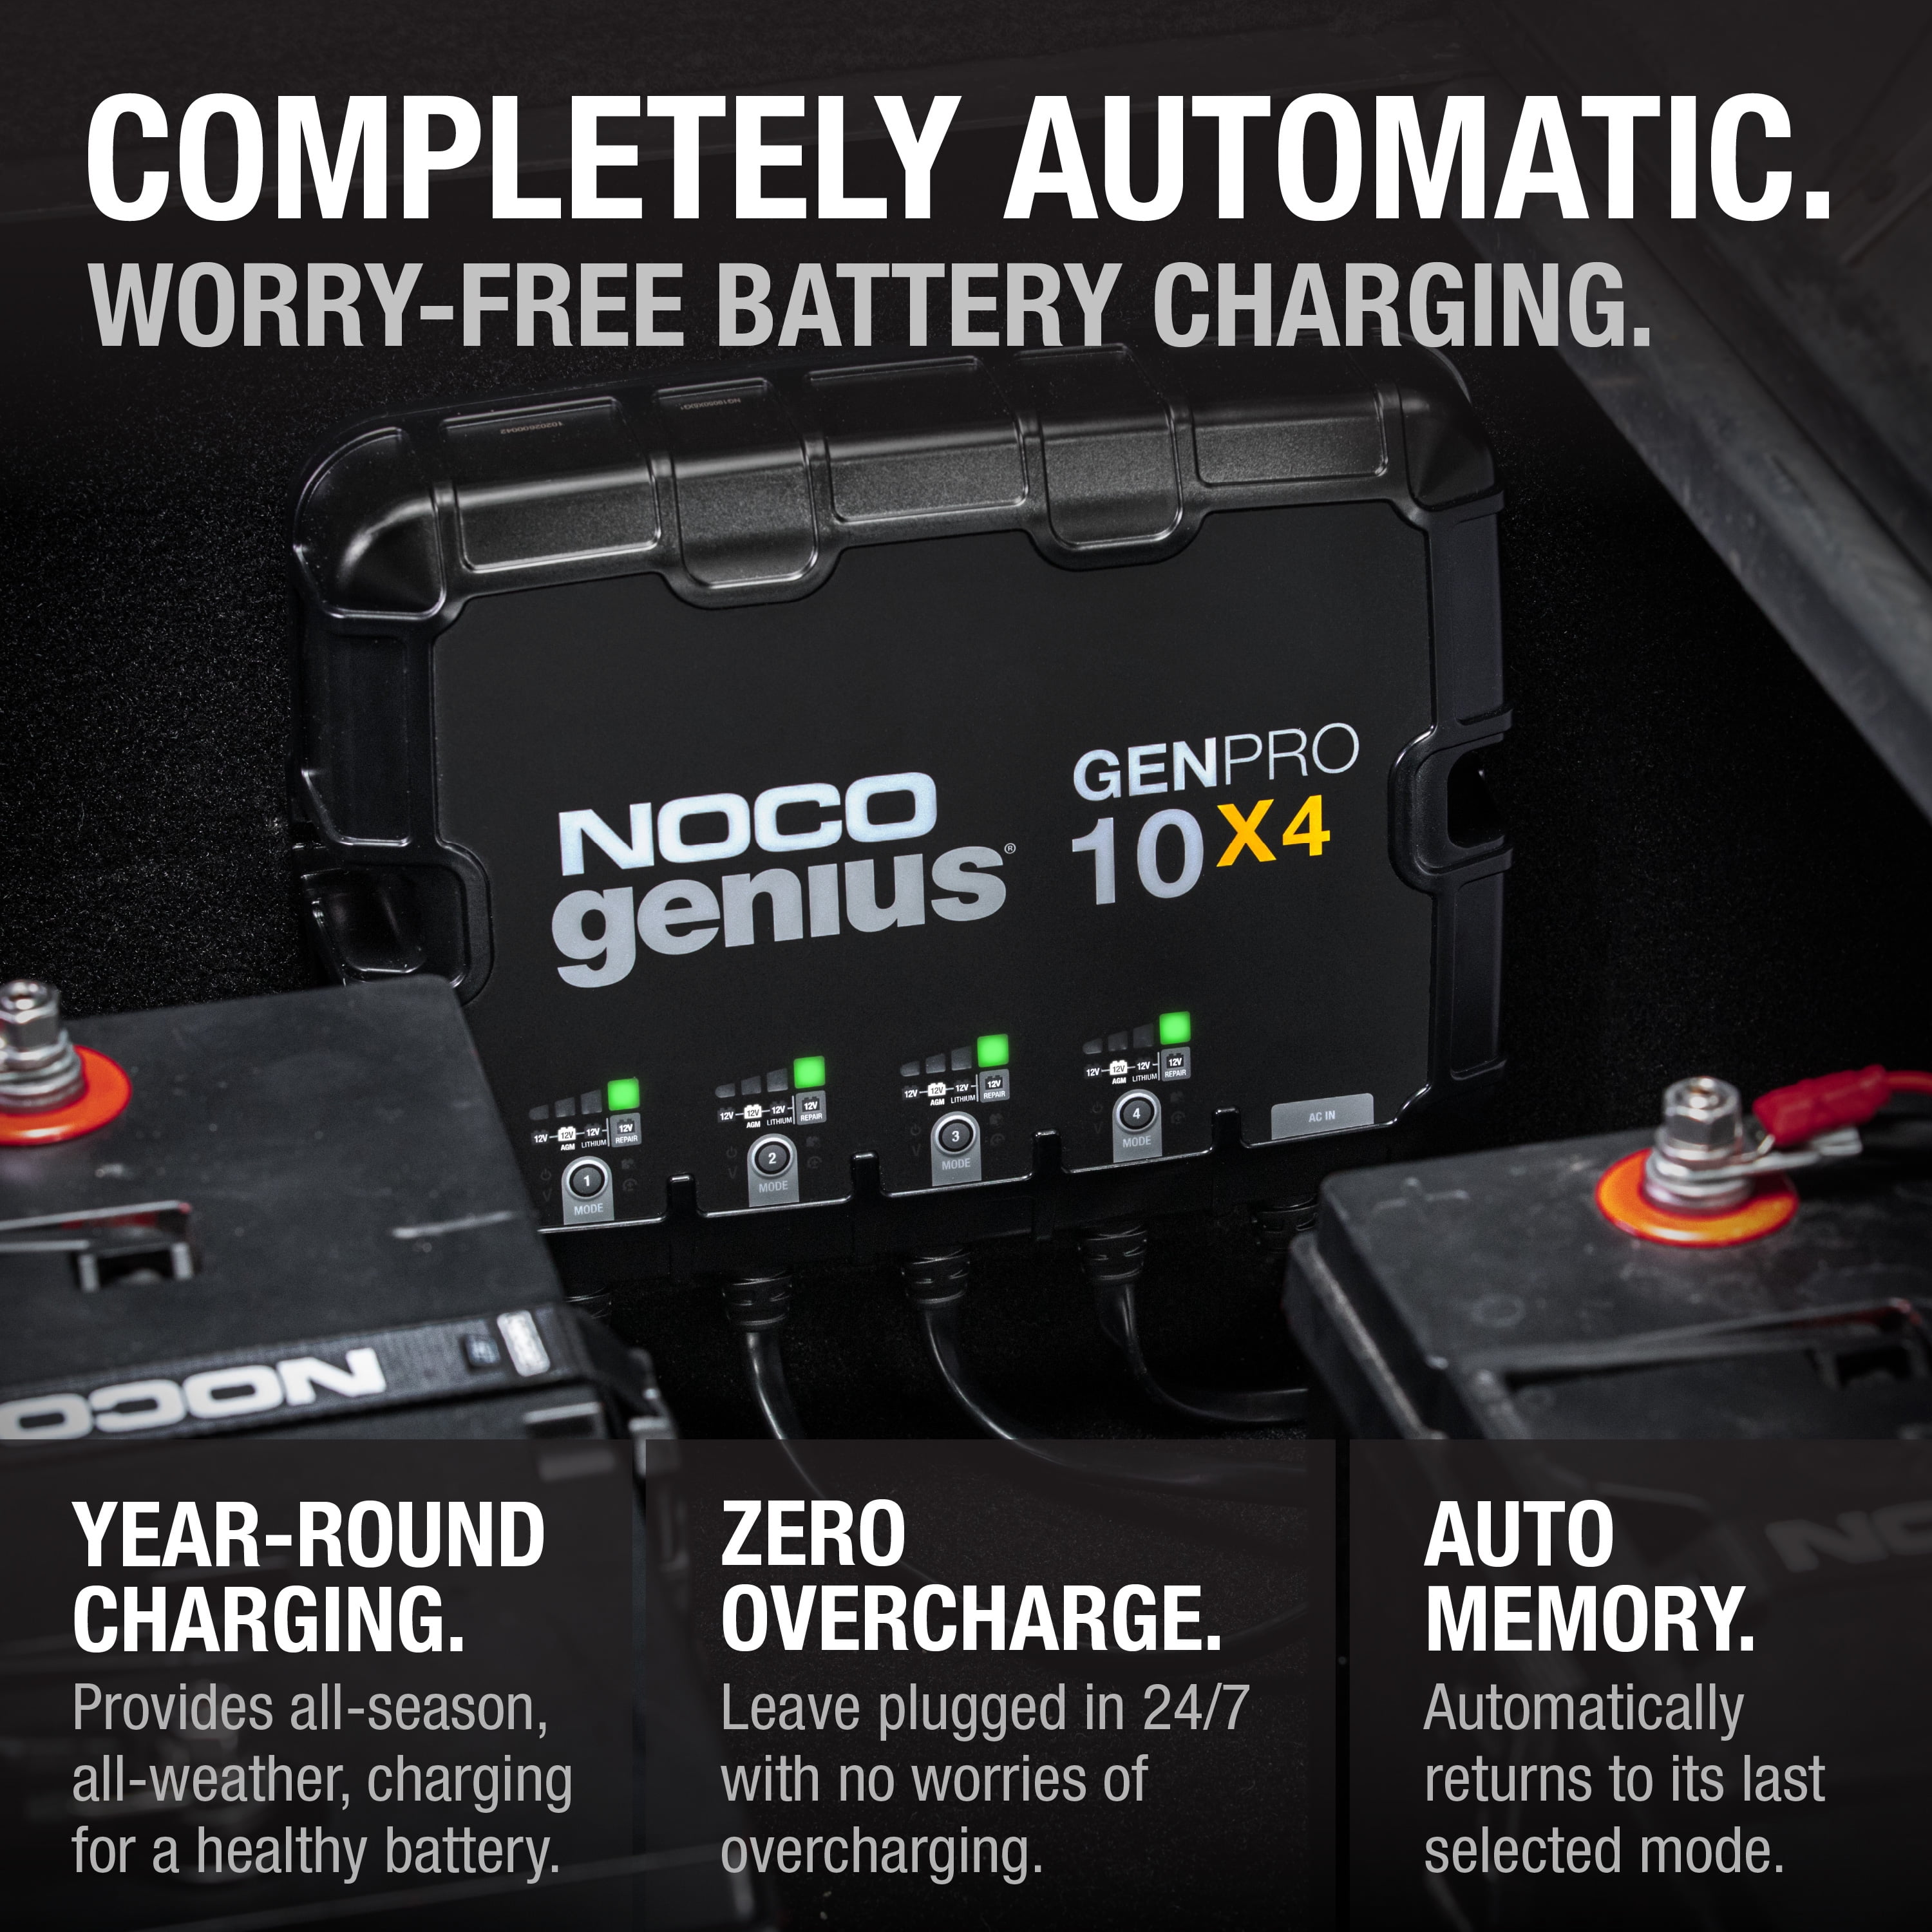 NOCO GENIUS G4, 4.4-Amp Smart Charger - JAGER PRO Store